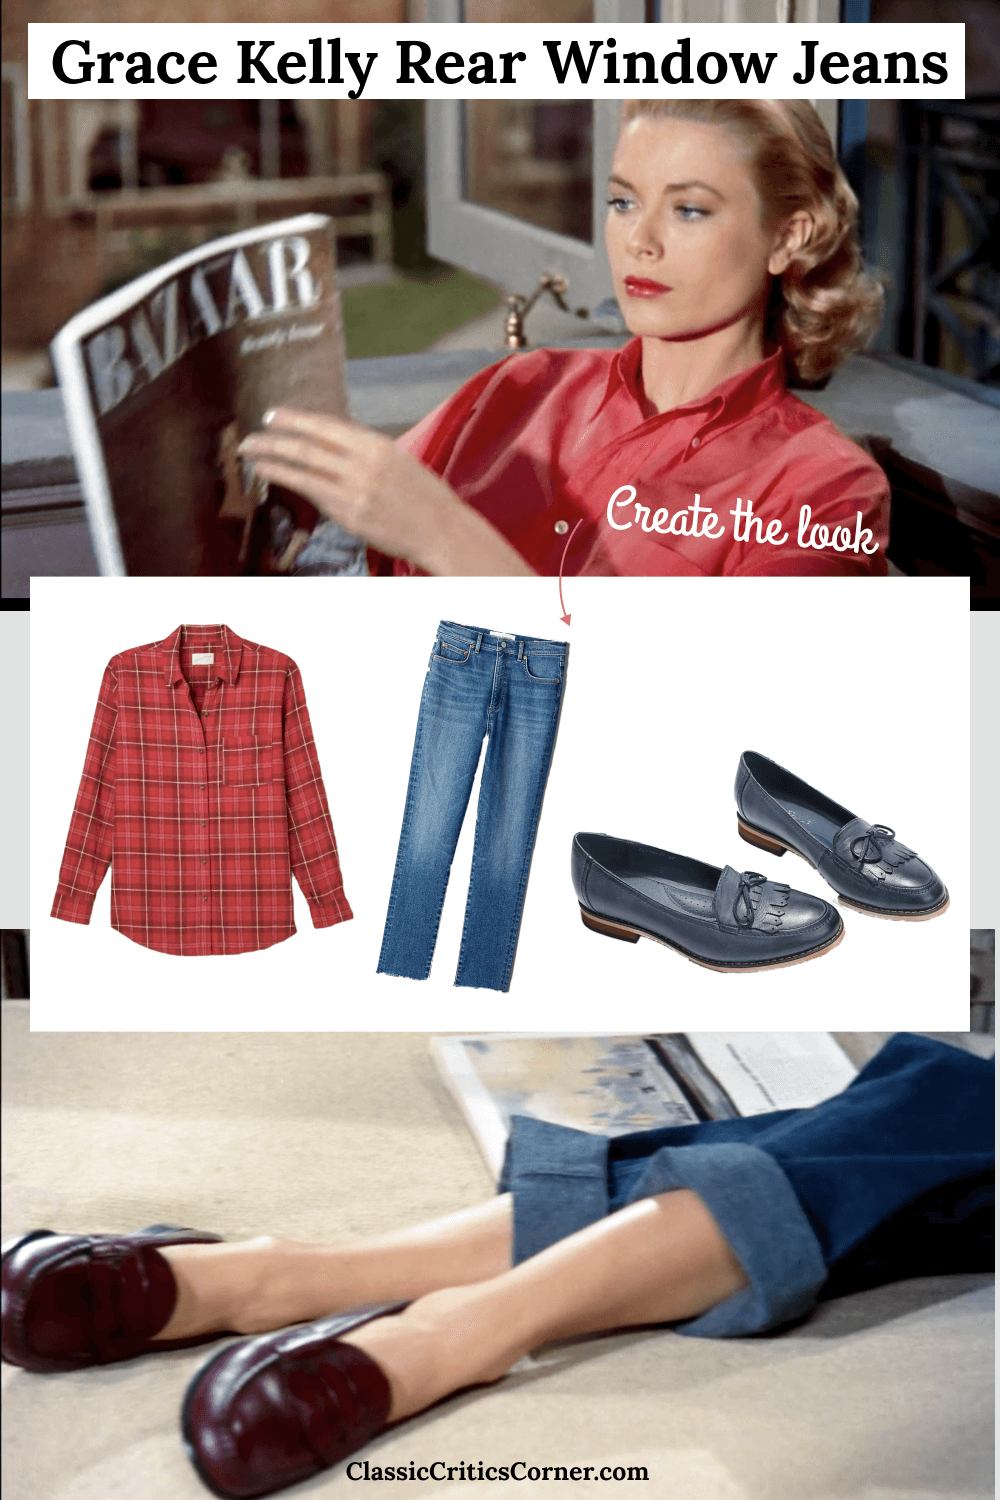 3 Insanely Chic Ways to Copy Grace Kelly Rear Window Jeans Outfit — Classic  Critics Corner - Your source for Old Hollywood Glamour, 1940s Fashion &  1950s Fashion